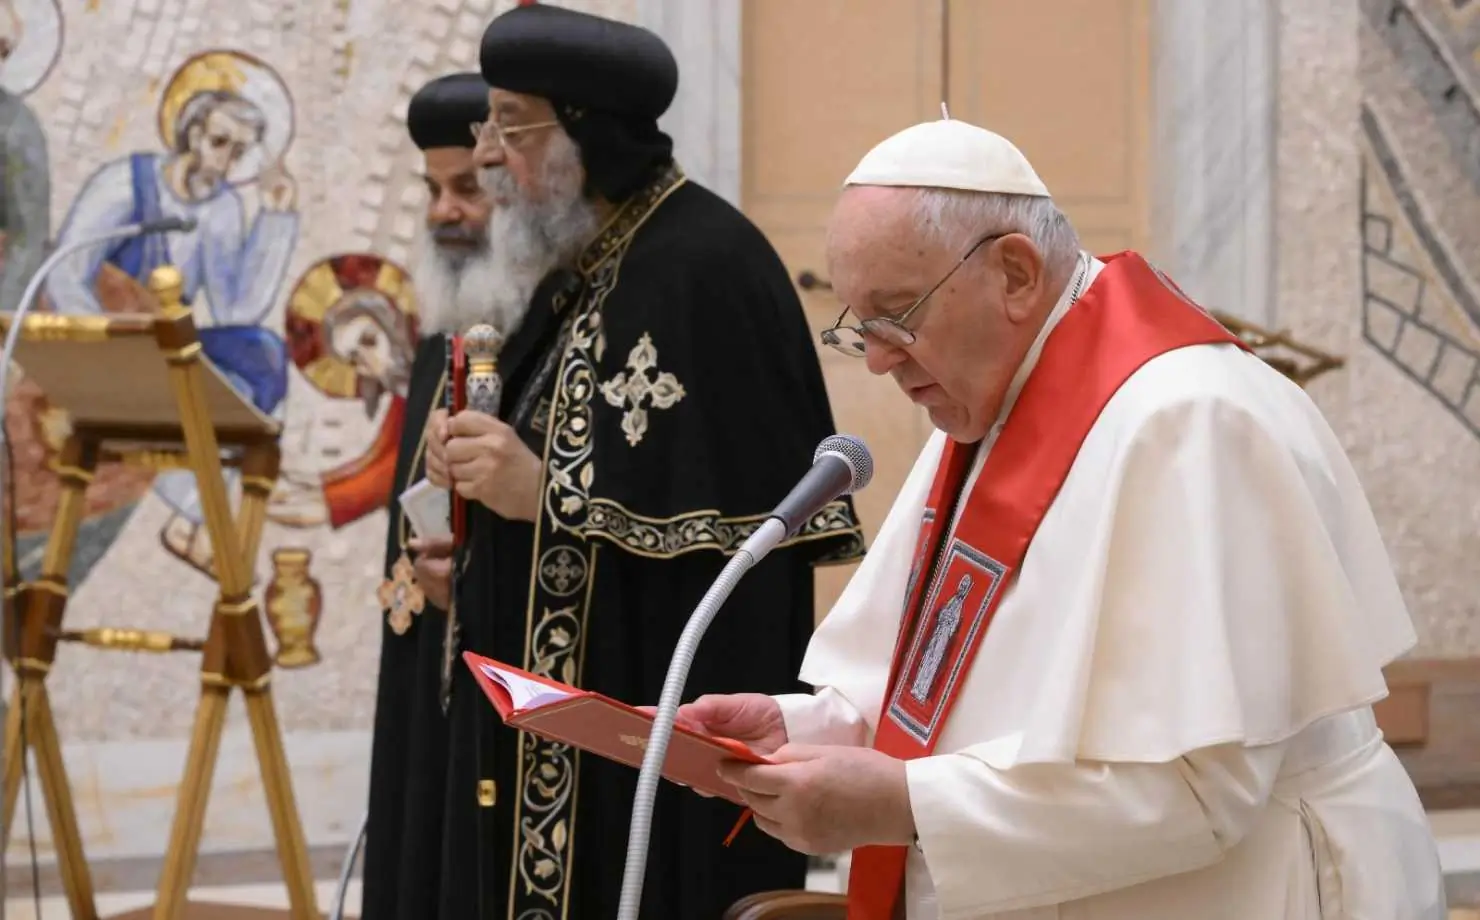 Pope Francis and Coptic Orthodox Pope Tawadros II of Alexandria, Egypt, lead prayers in the Redemptoris Mater Chapel of the Apostolic Palace at the Vatican